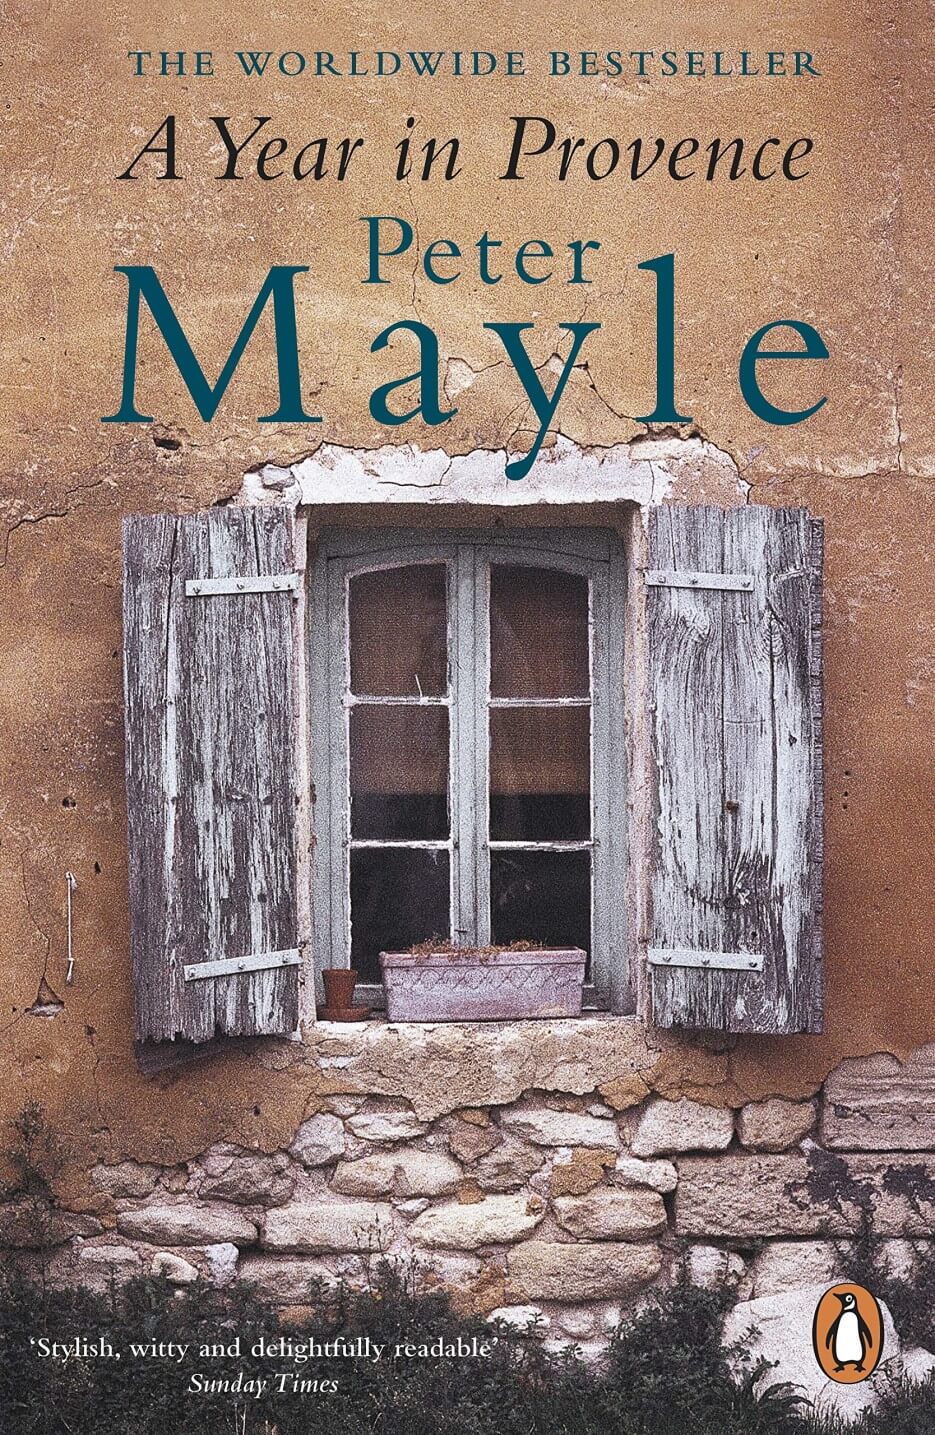 Cover photo of Peter Mayle's A Year in Provence